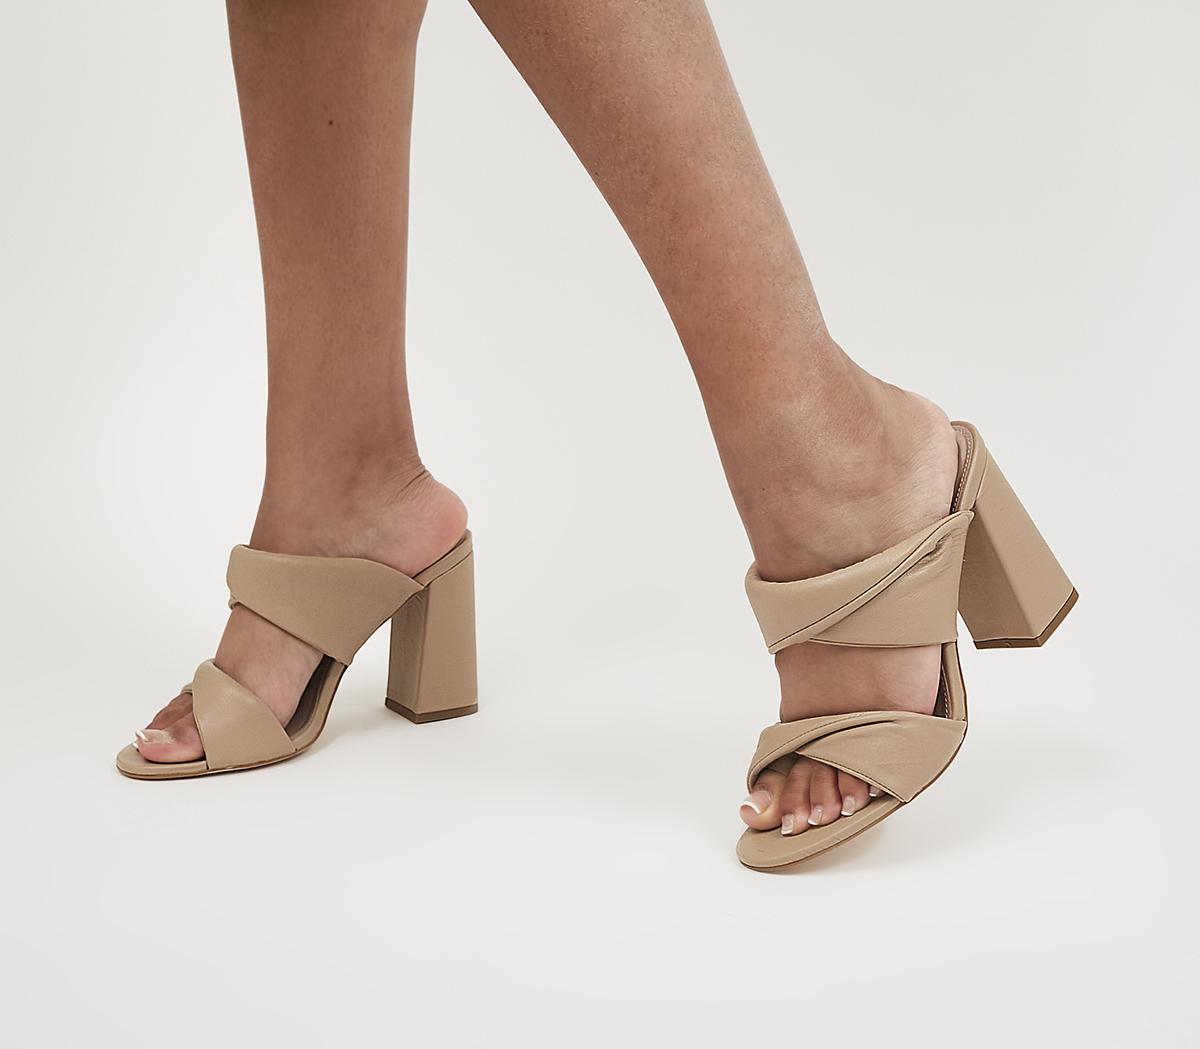 OFFICEMarcy Twist Two Strap MulesBeige Leather